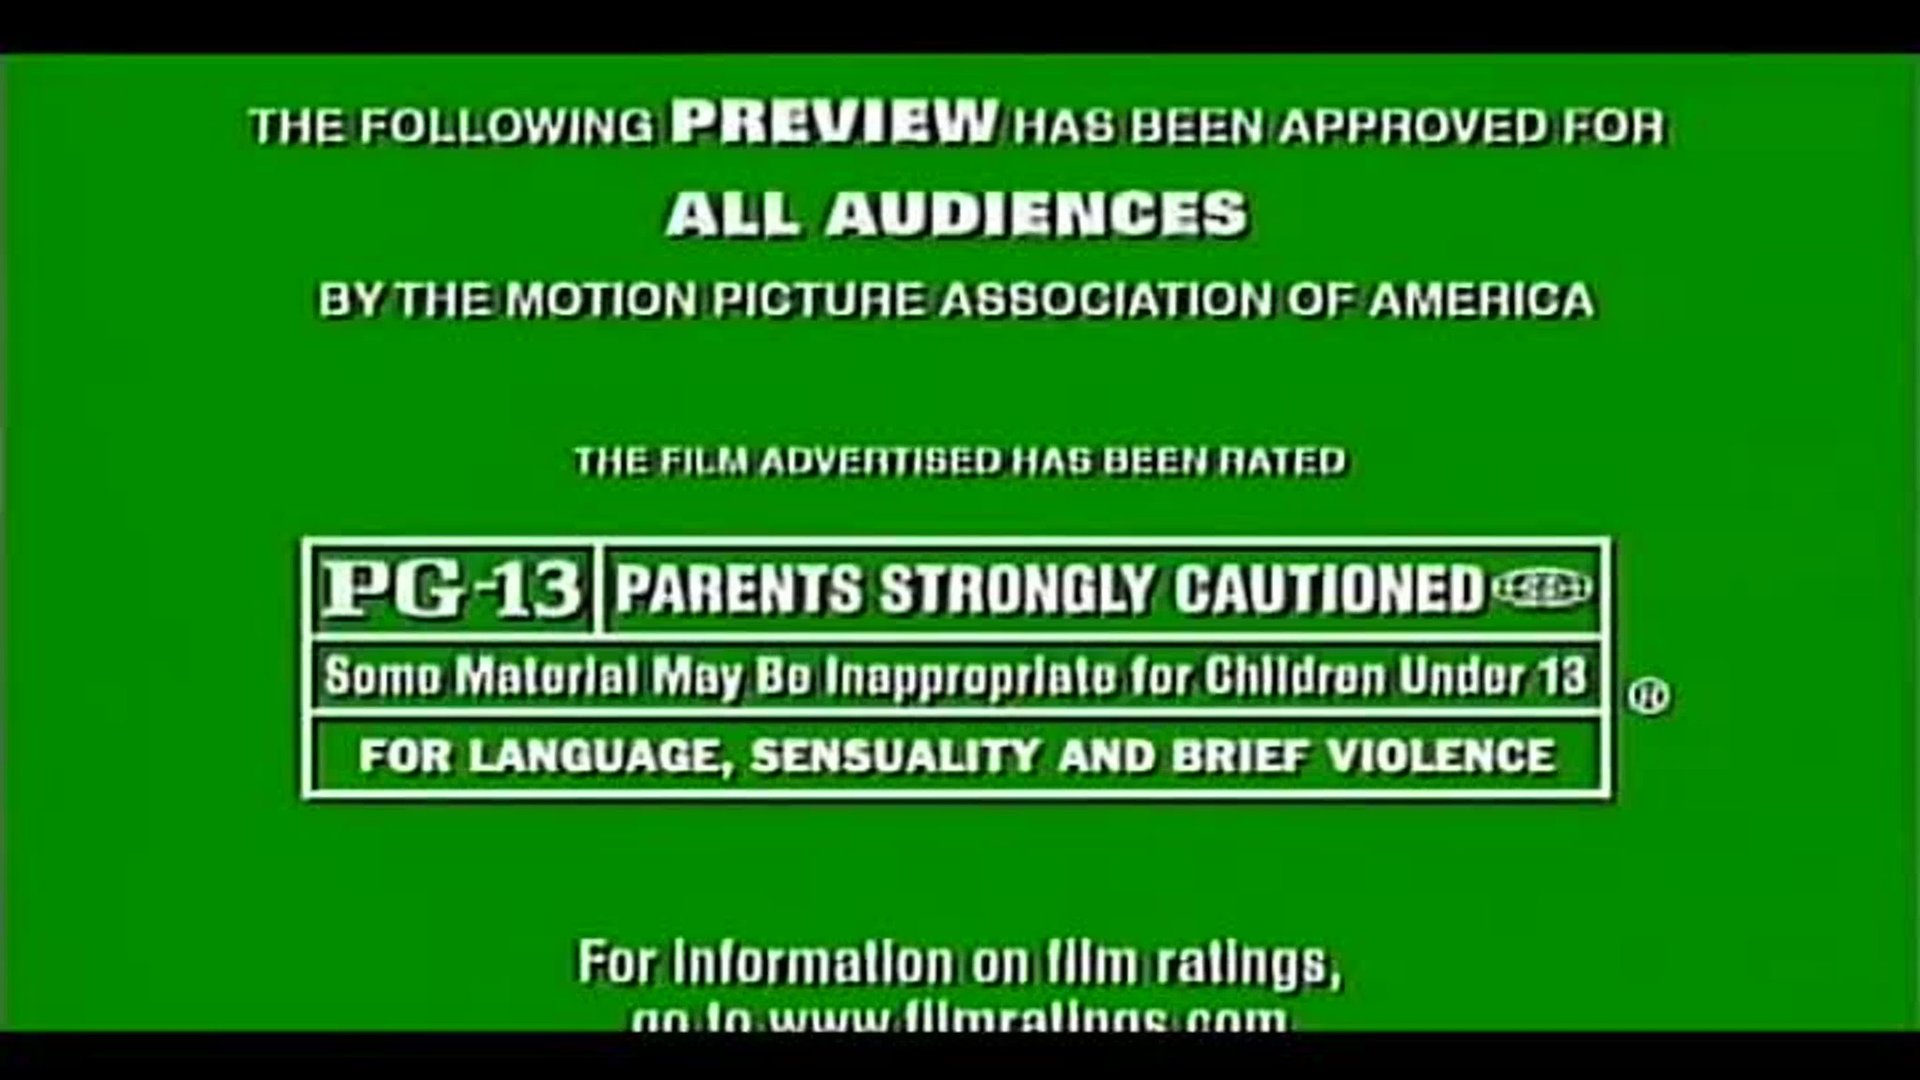 Appropriate audiences. The following Preview has been approved for all audiences PG.